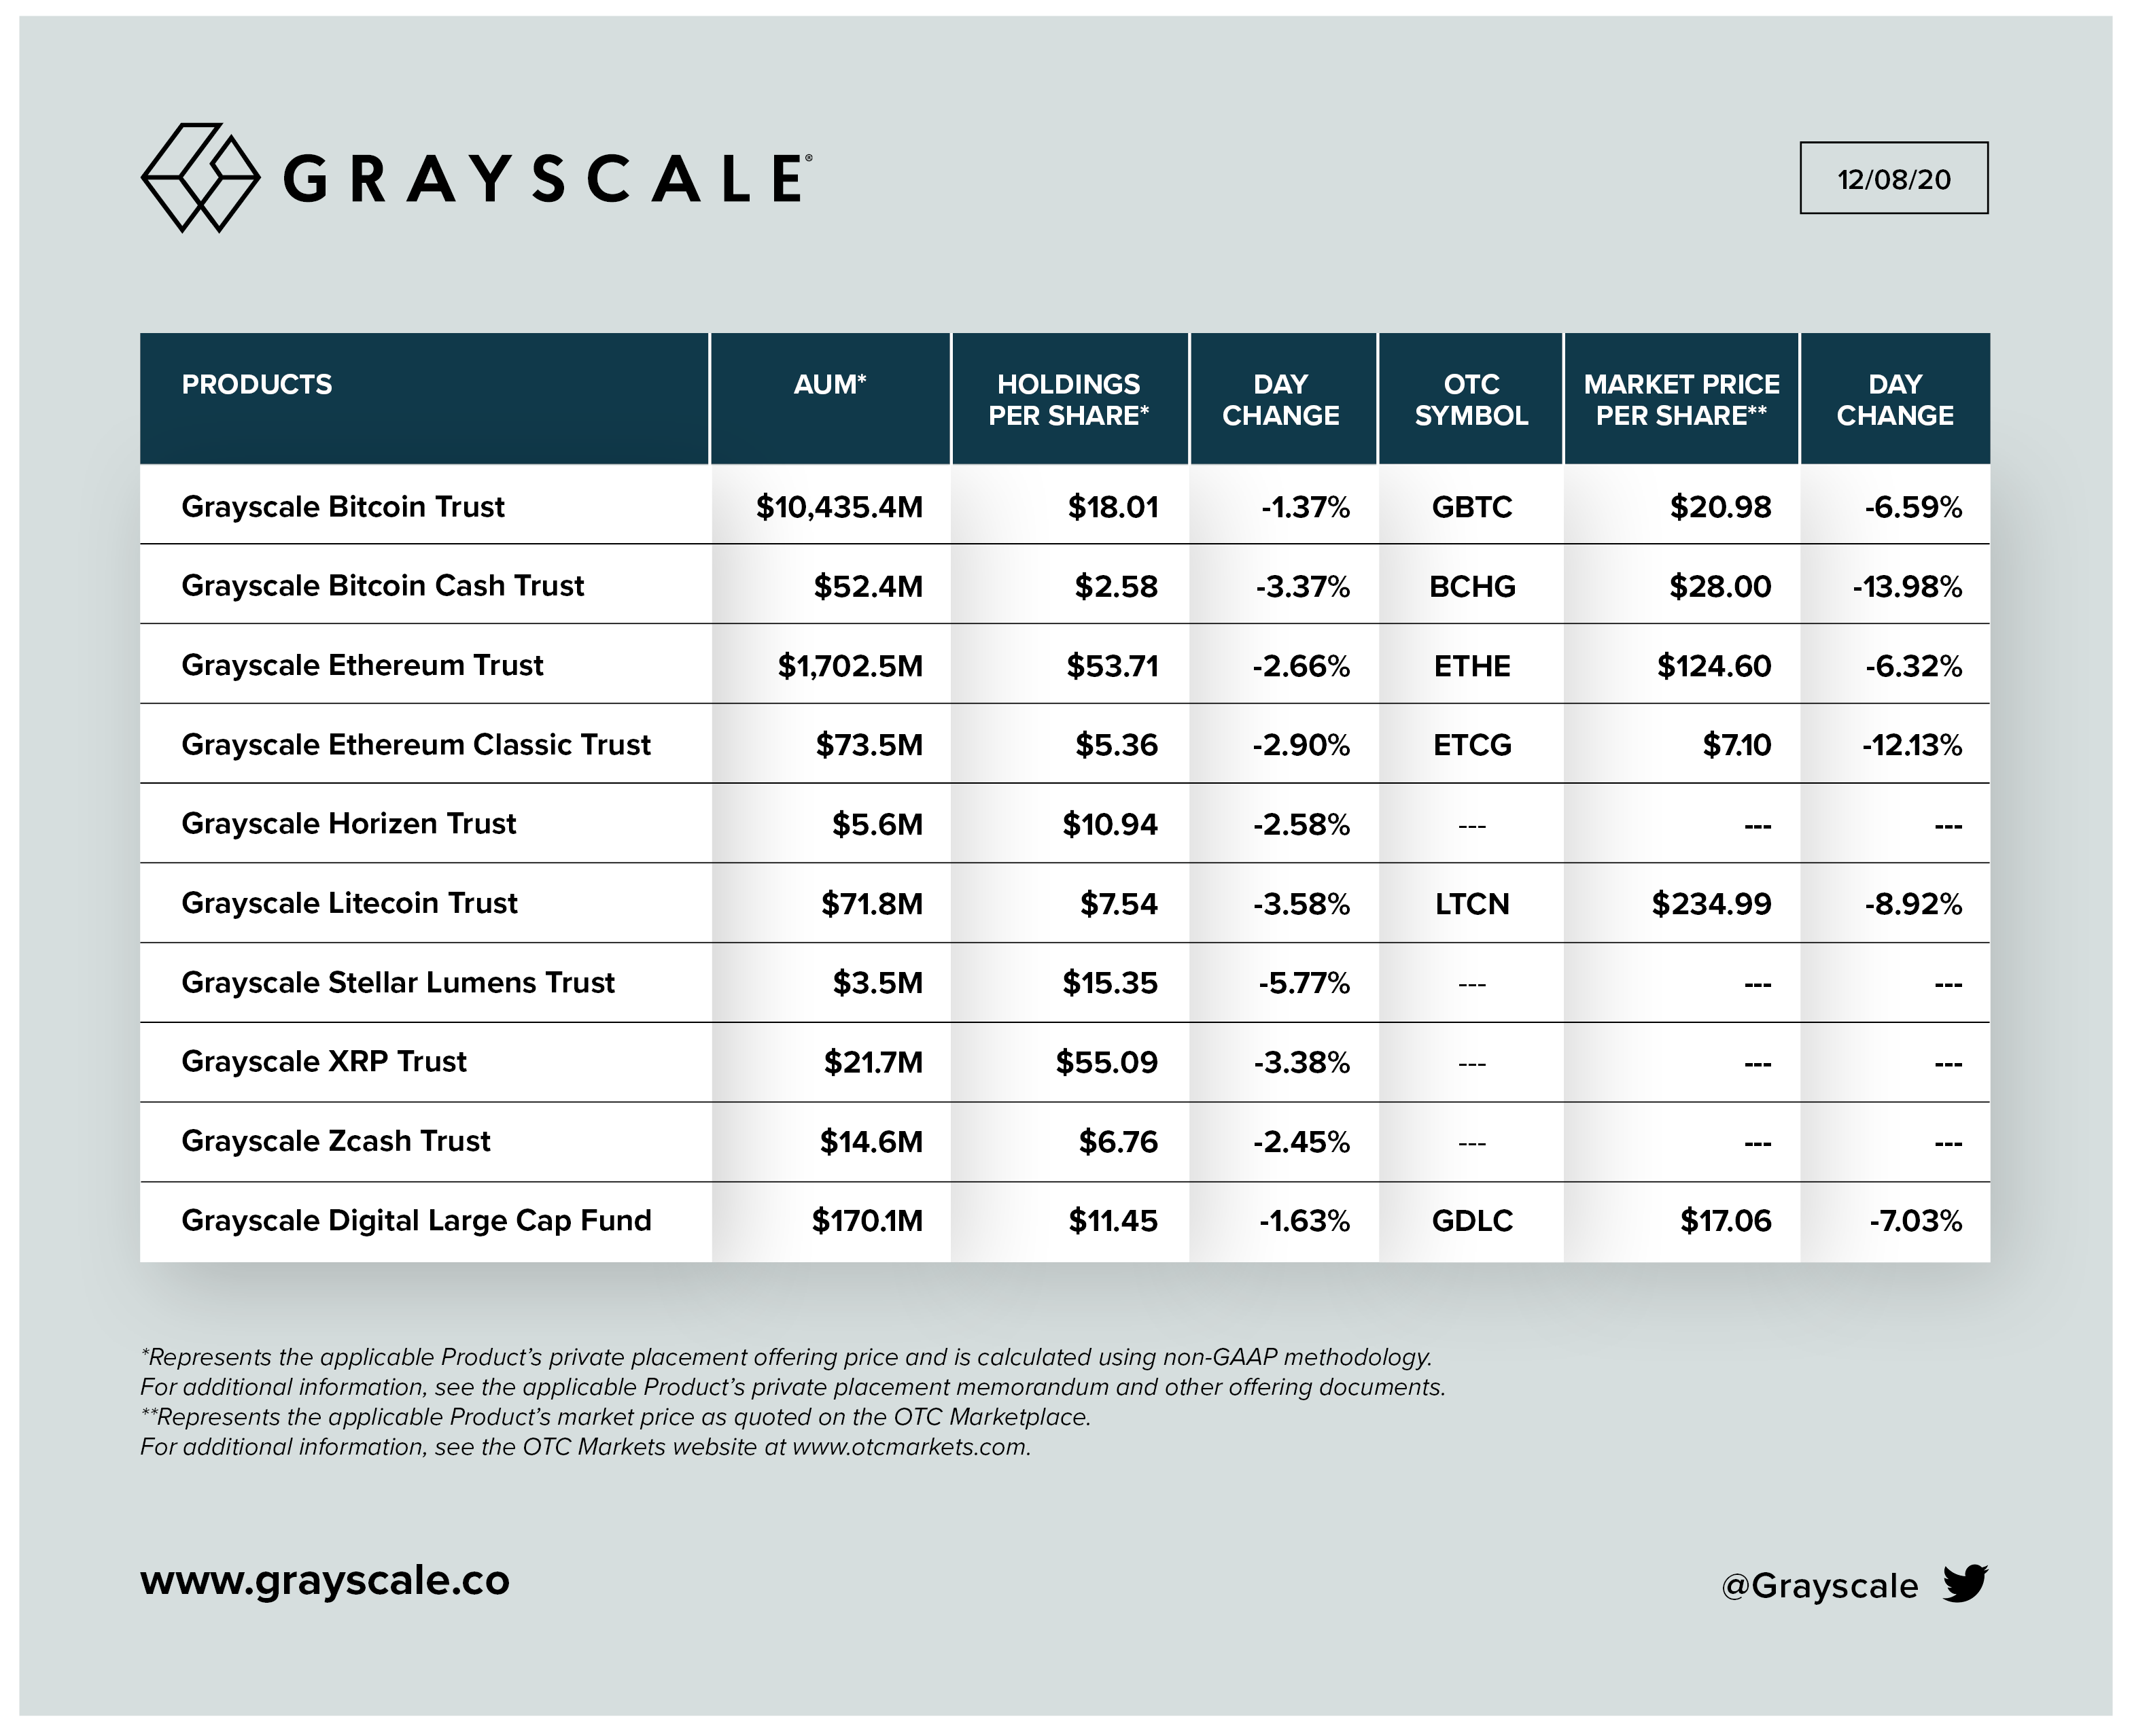 Grayscale - Asset Management Company | Morningstar